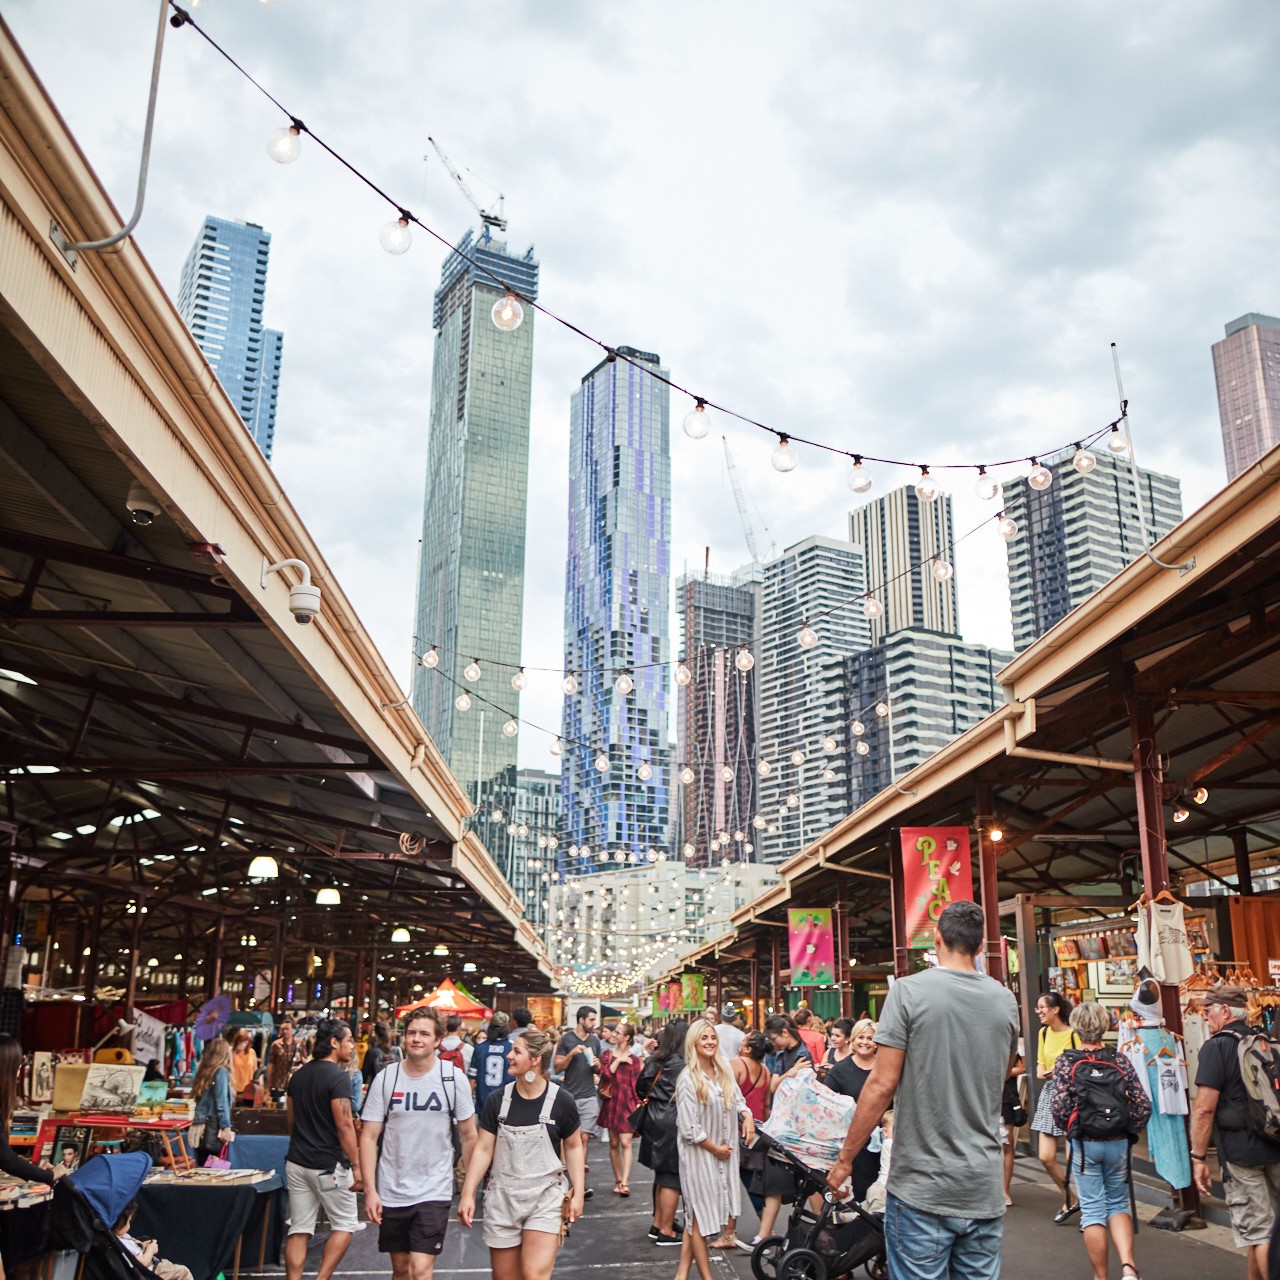 image of outdoor vendor stalls at the Queen Victoria Market in Melbourne with a city view in the background.